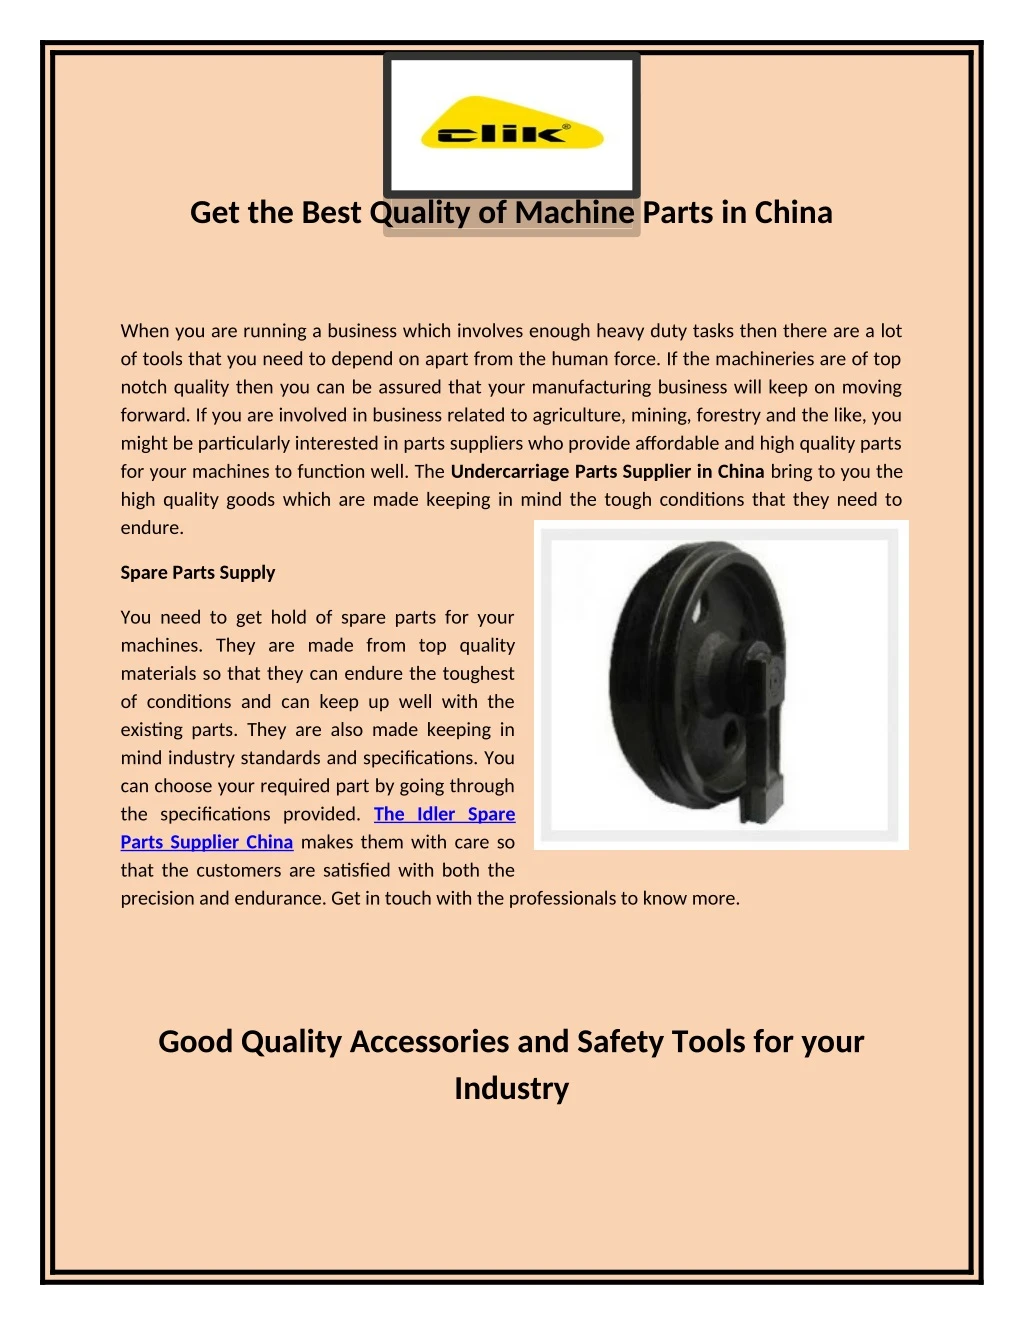 get the best quality of machine parts in china